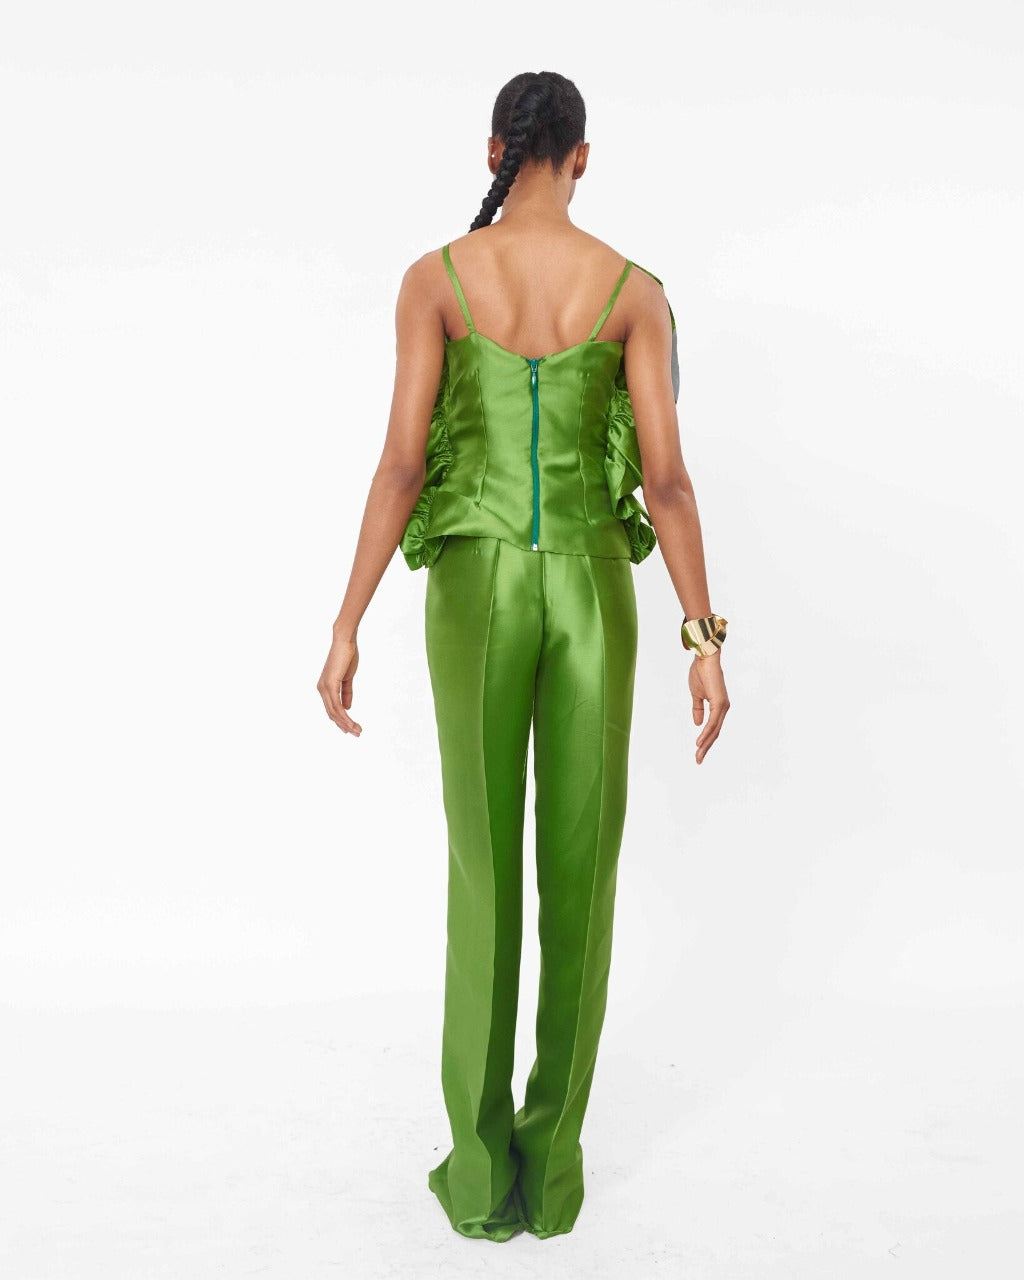 The back of a model wearing an Olive top with ruffle detailing and an Olive straight cut pant